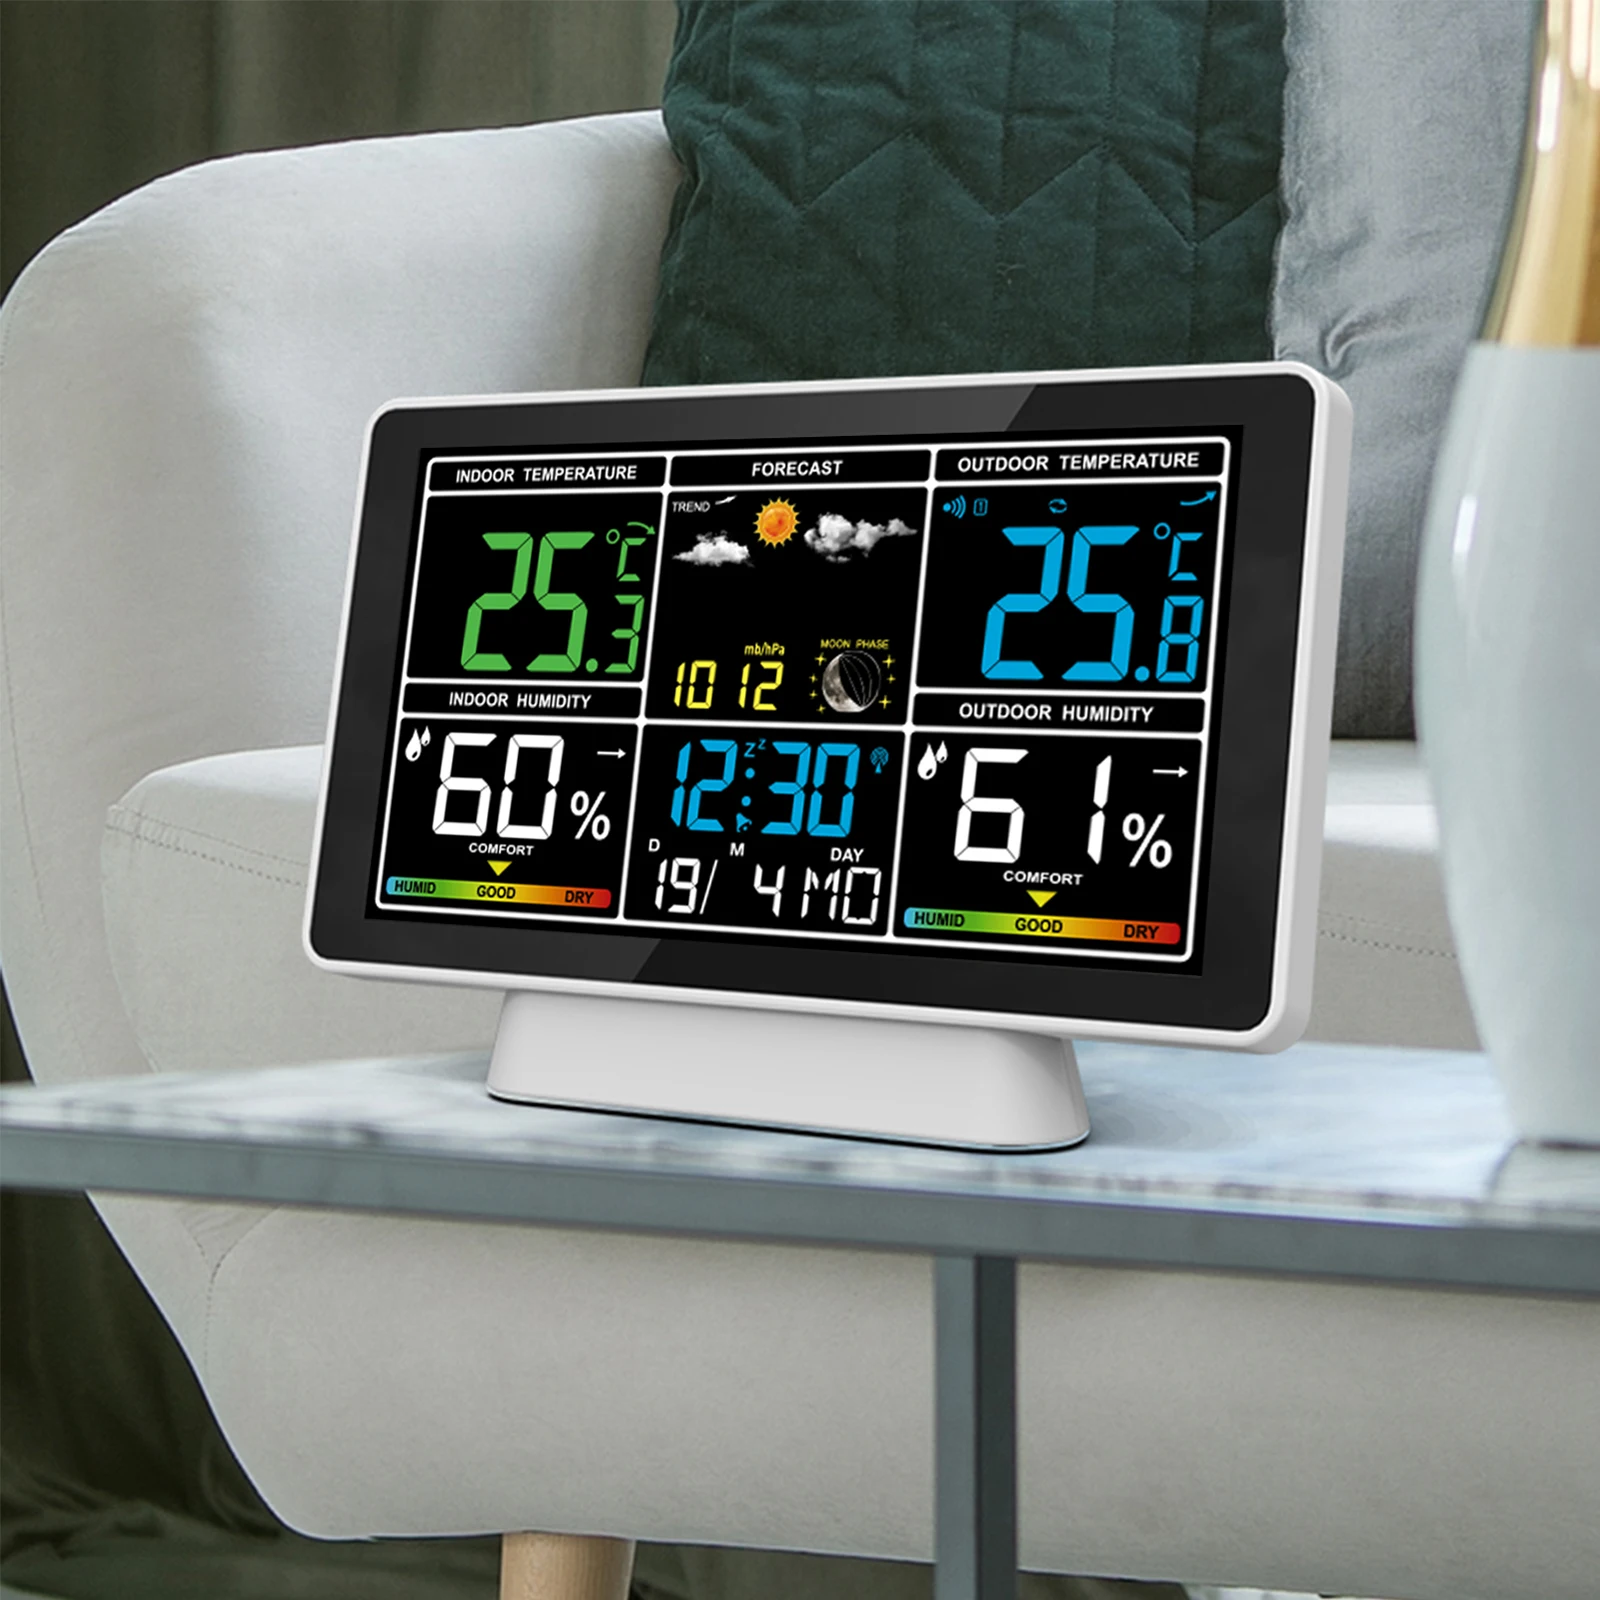 Colorful Digital Display Radio Control Indoor Outdoor Temperature Humidity Forecast Wireless Weather Station